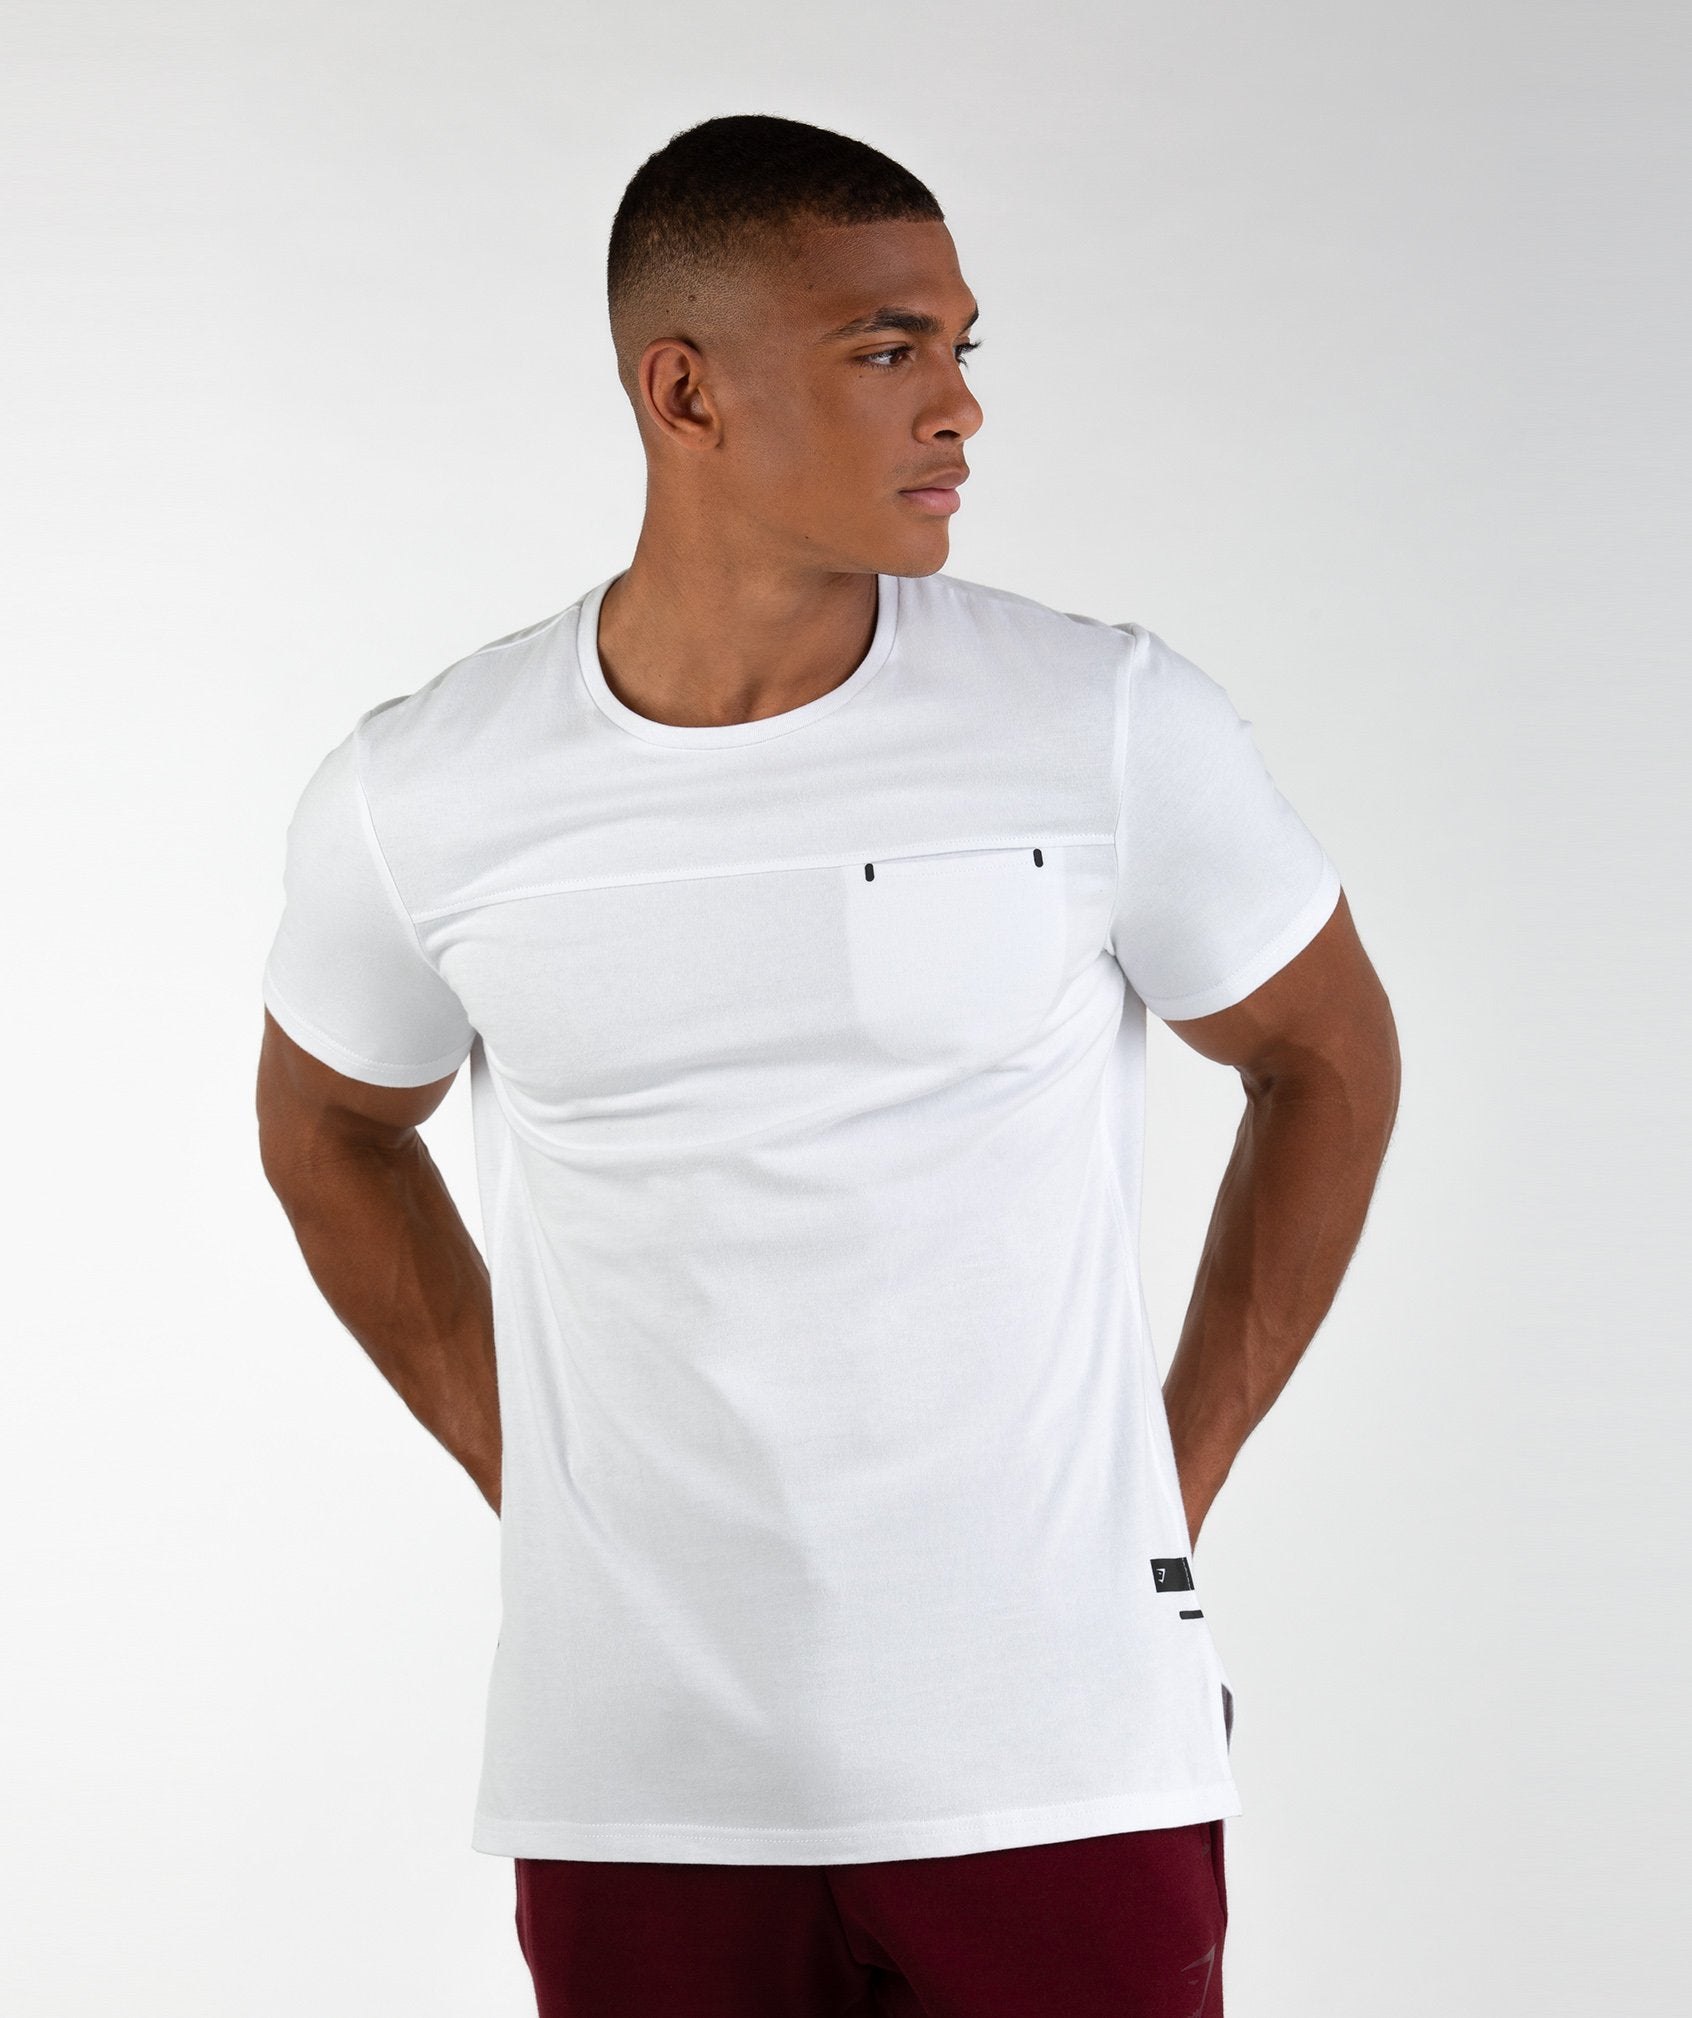 City T-Shirt in White - view 2